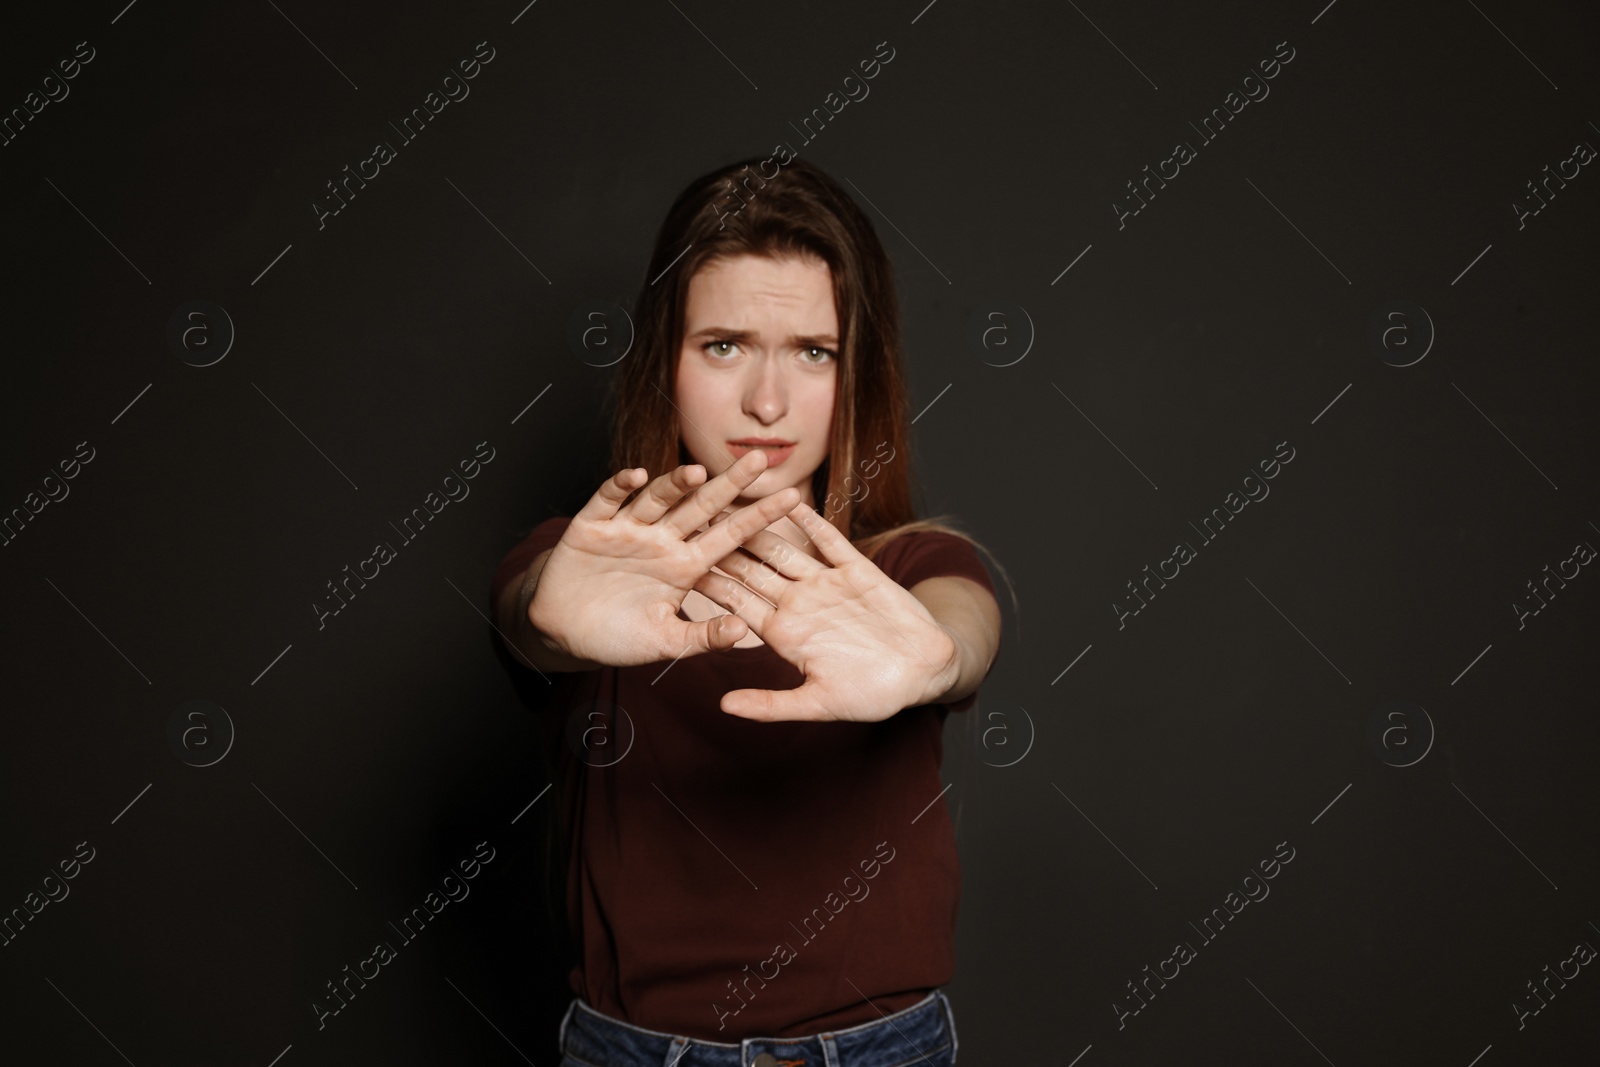 Photo of Young woman making stop gesture against dark background